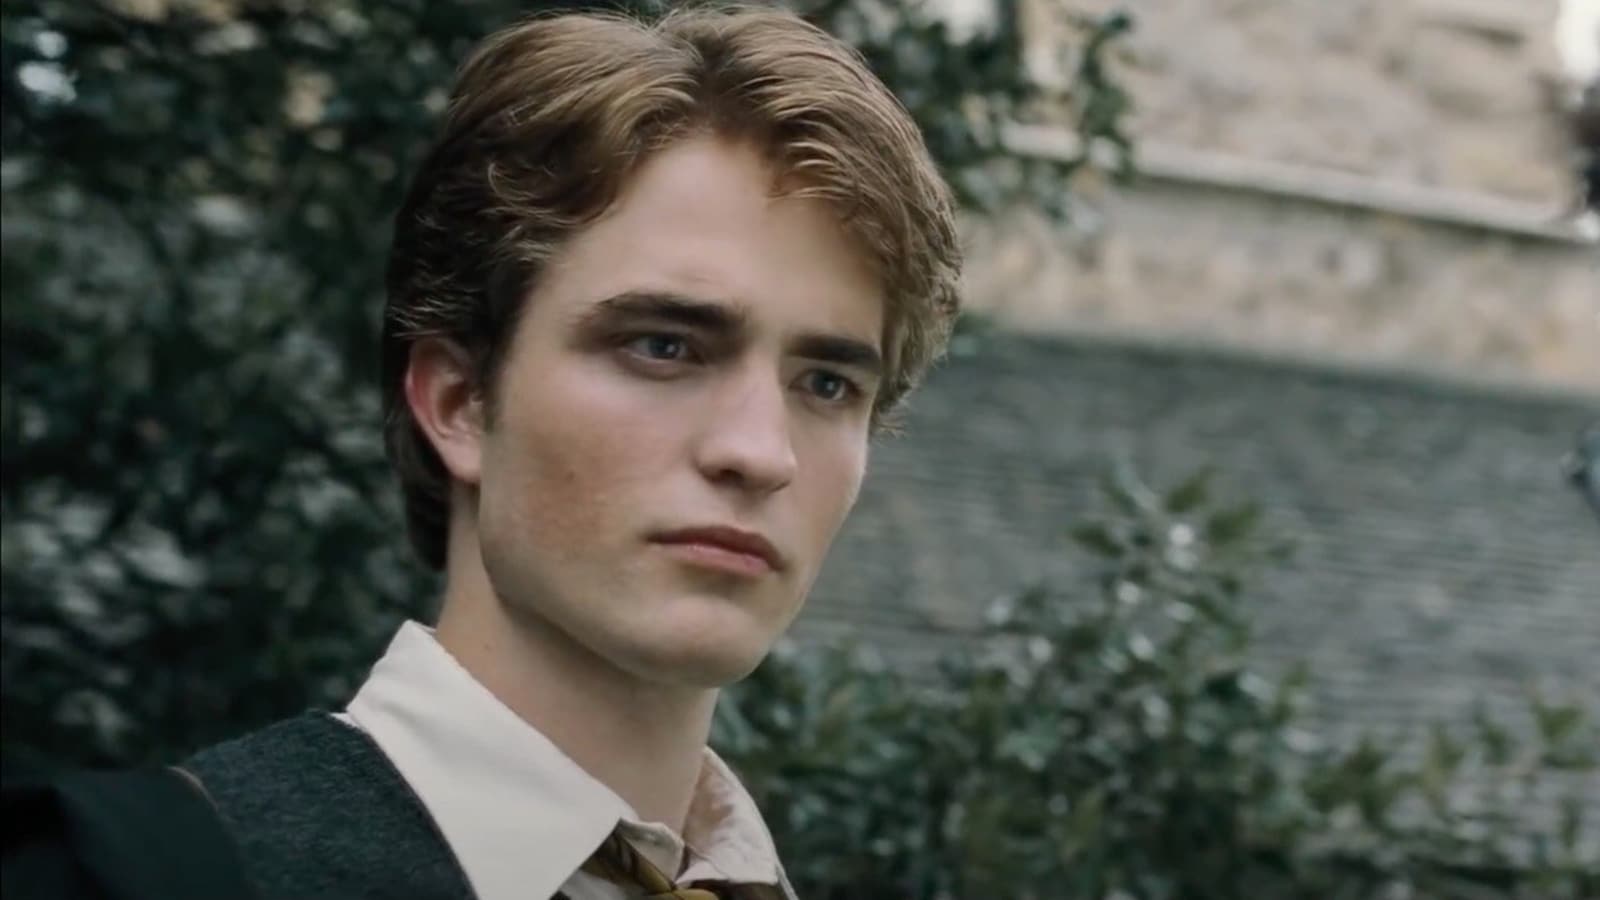 Who portrayed Cedric Diggory in the Harry Potter movies?